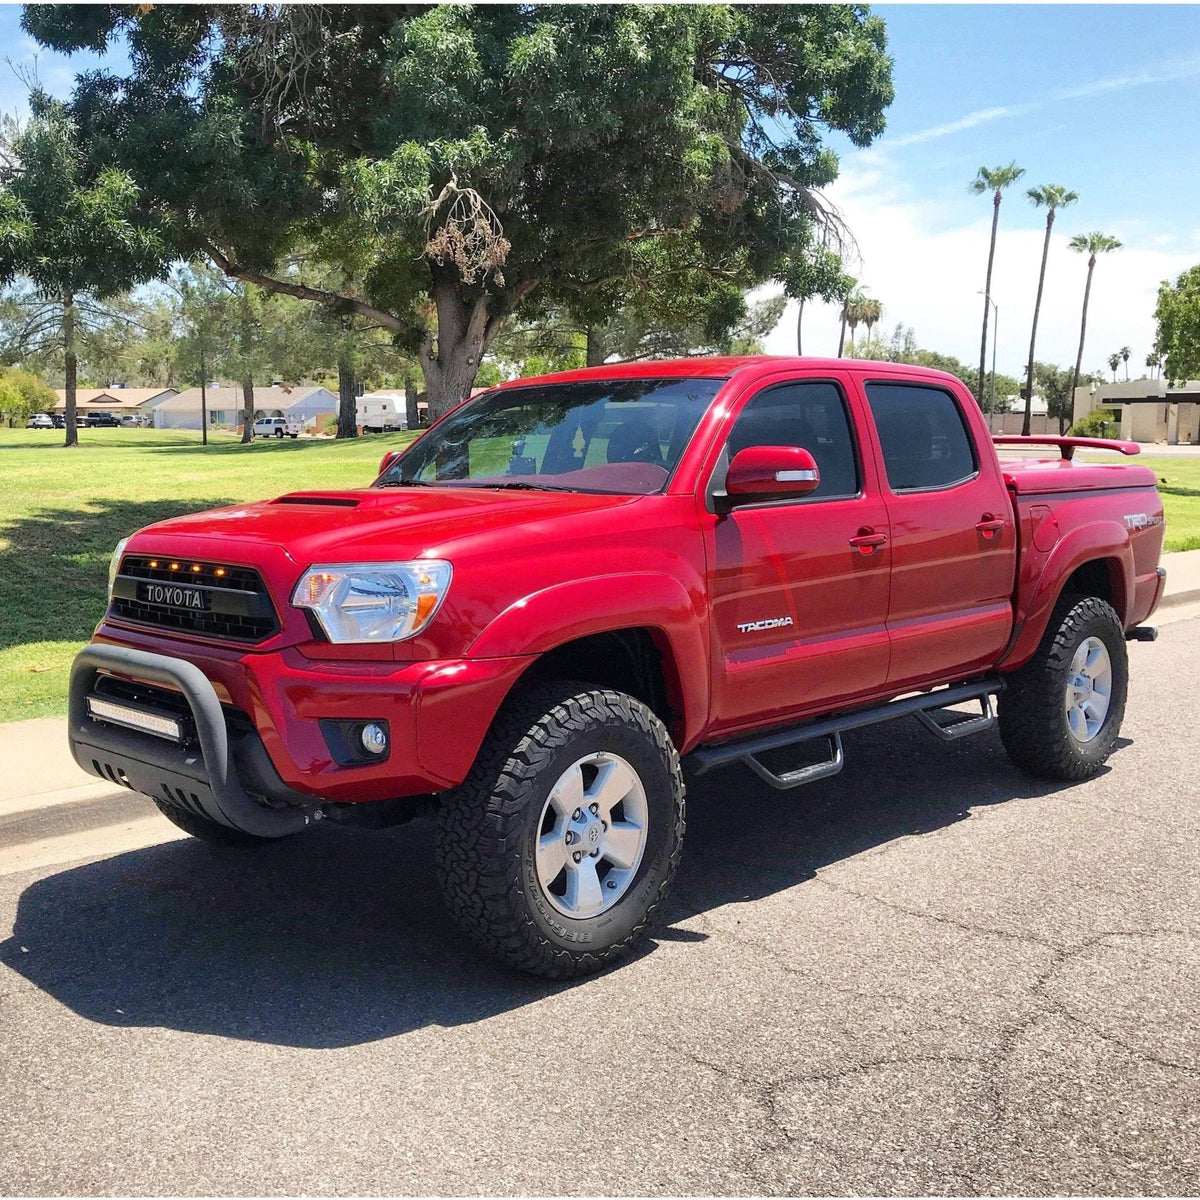 2012-2015 Toyota Tacoma | Raptor Lights - Truck Accessories Guy